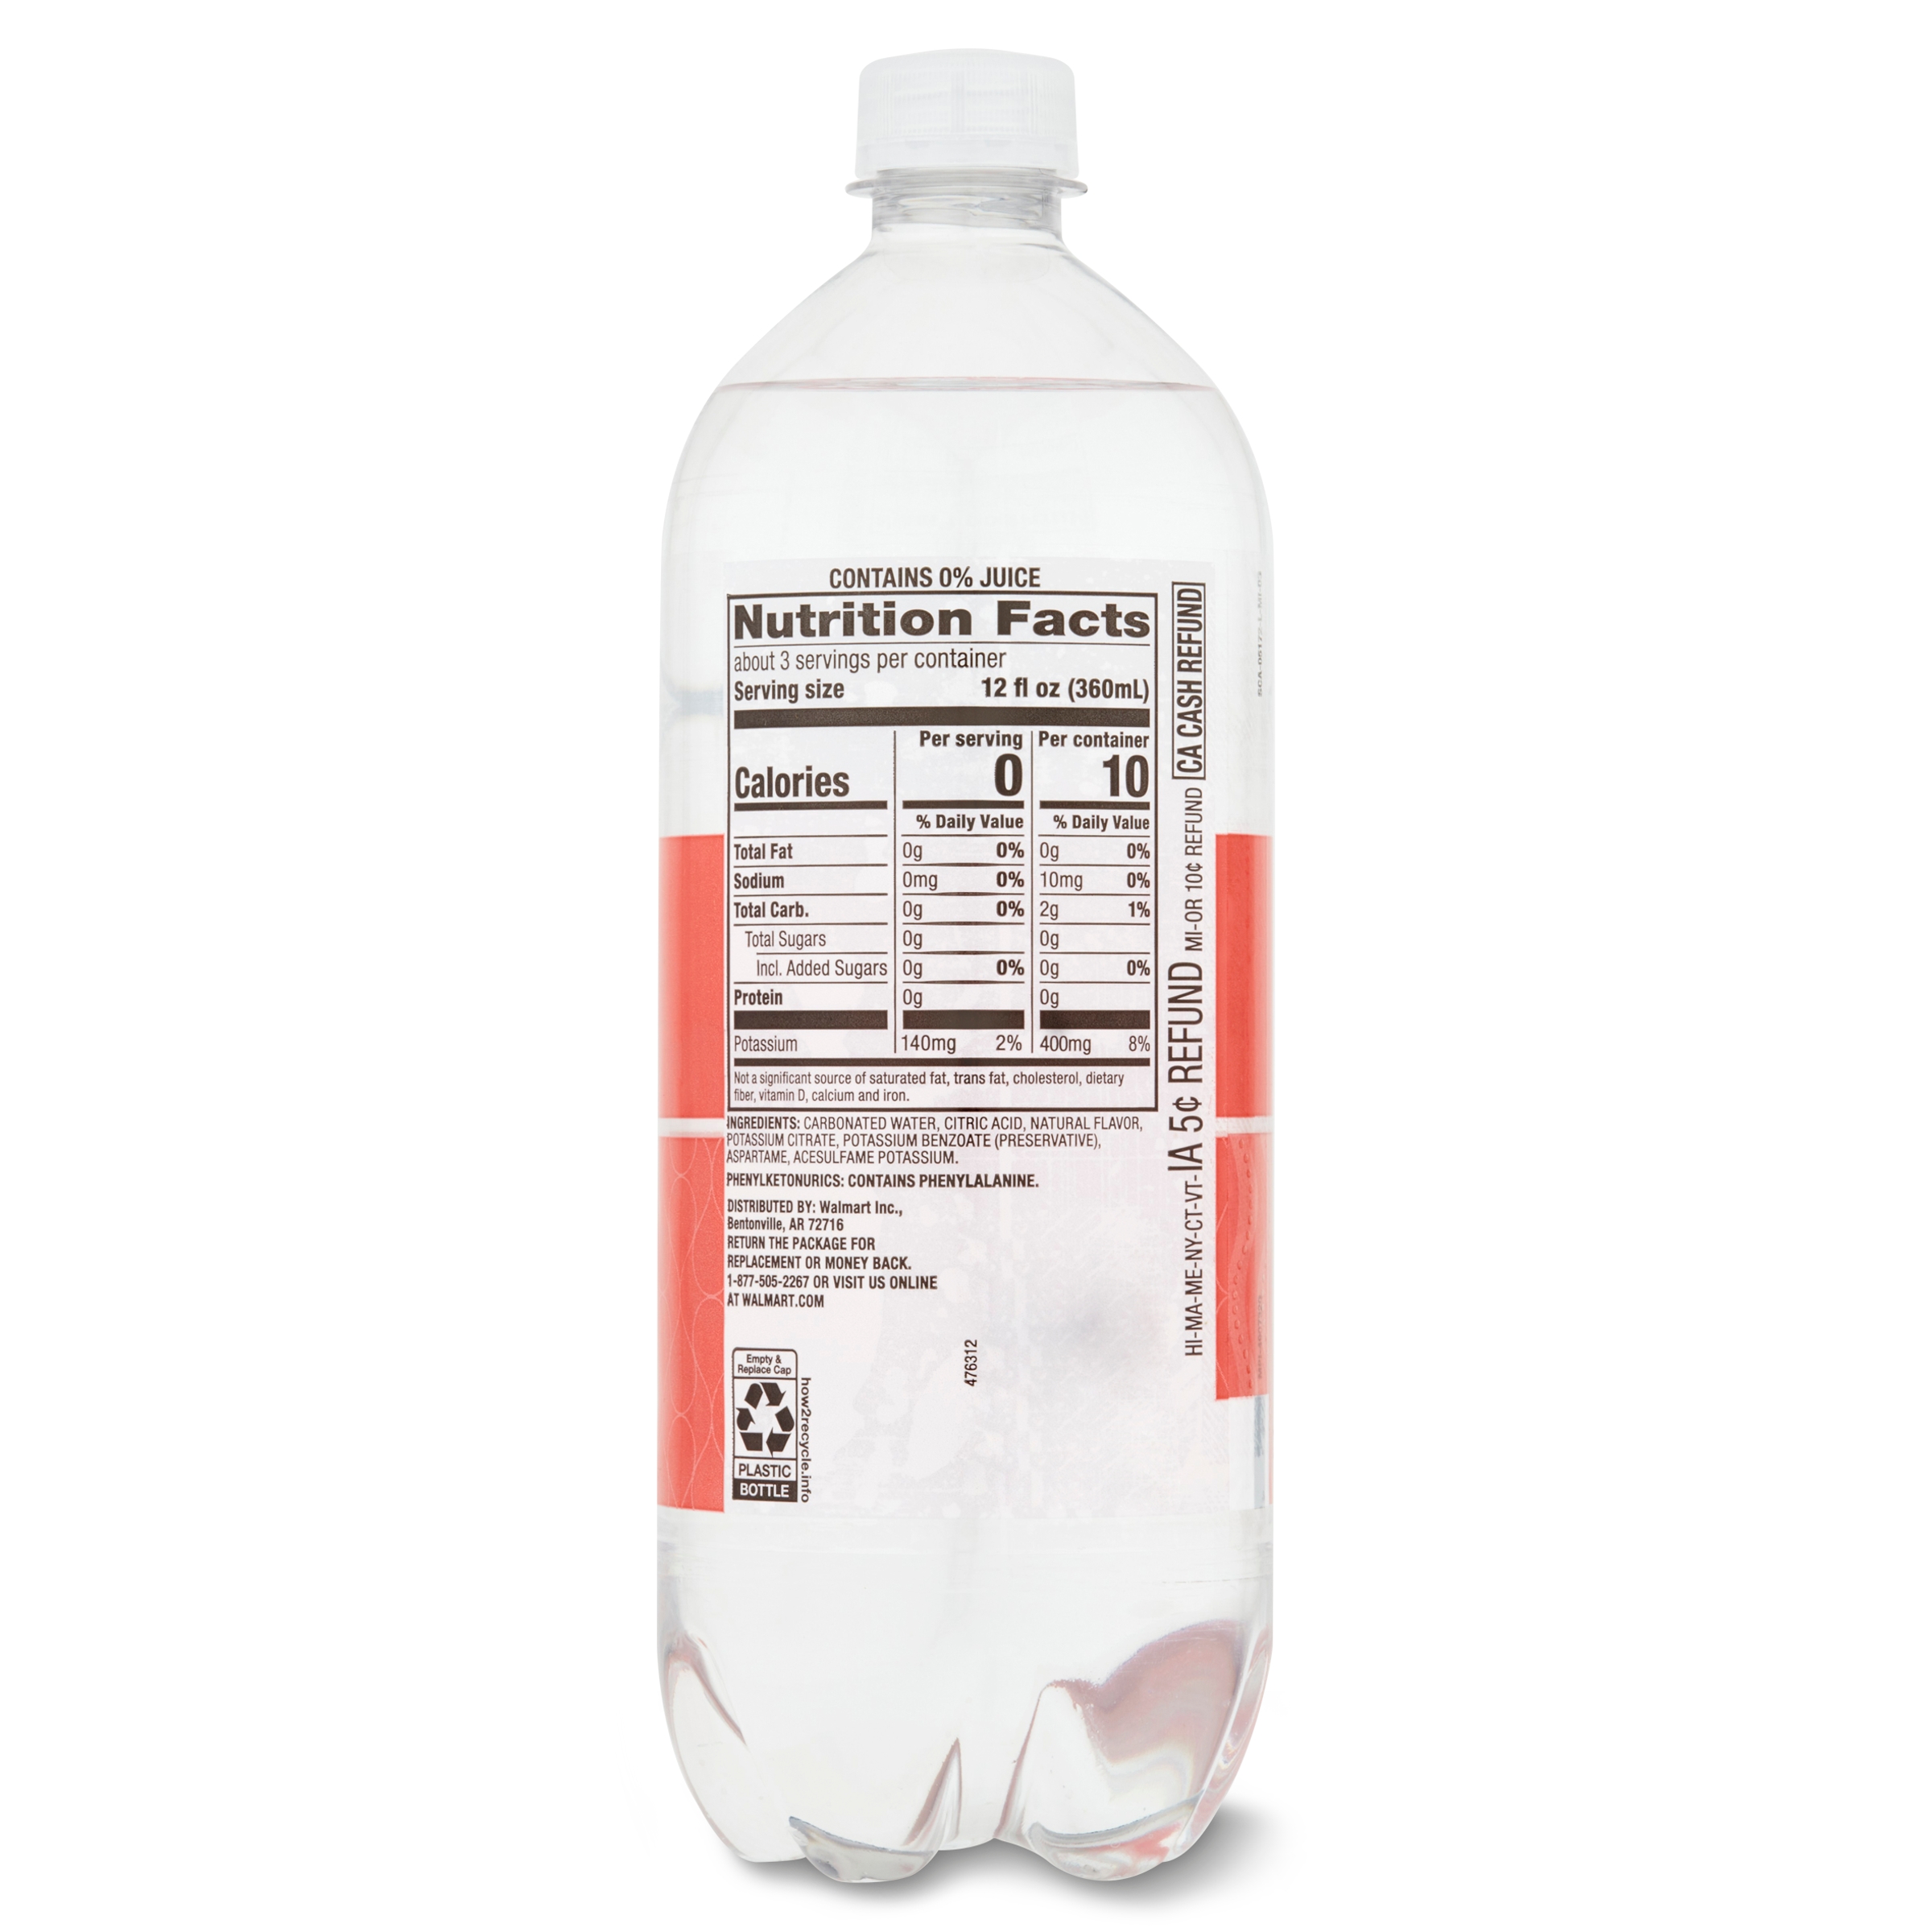 Clear American Fuji Apple Sparkling Water, 33.8 fl oz - image 5 of 7